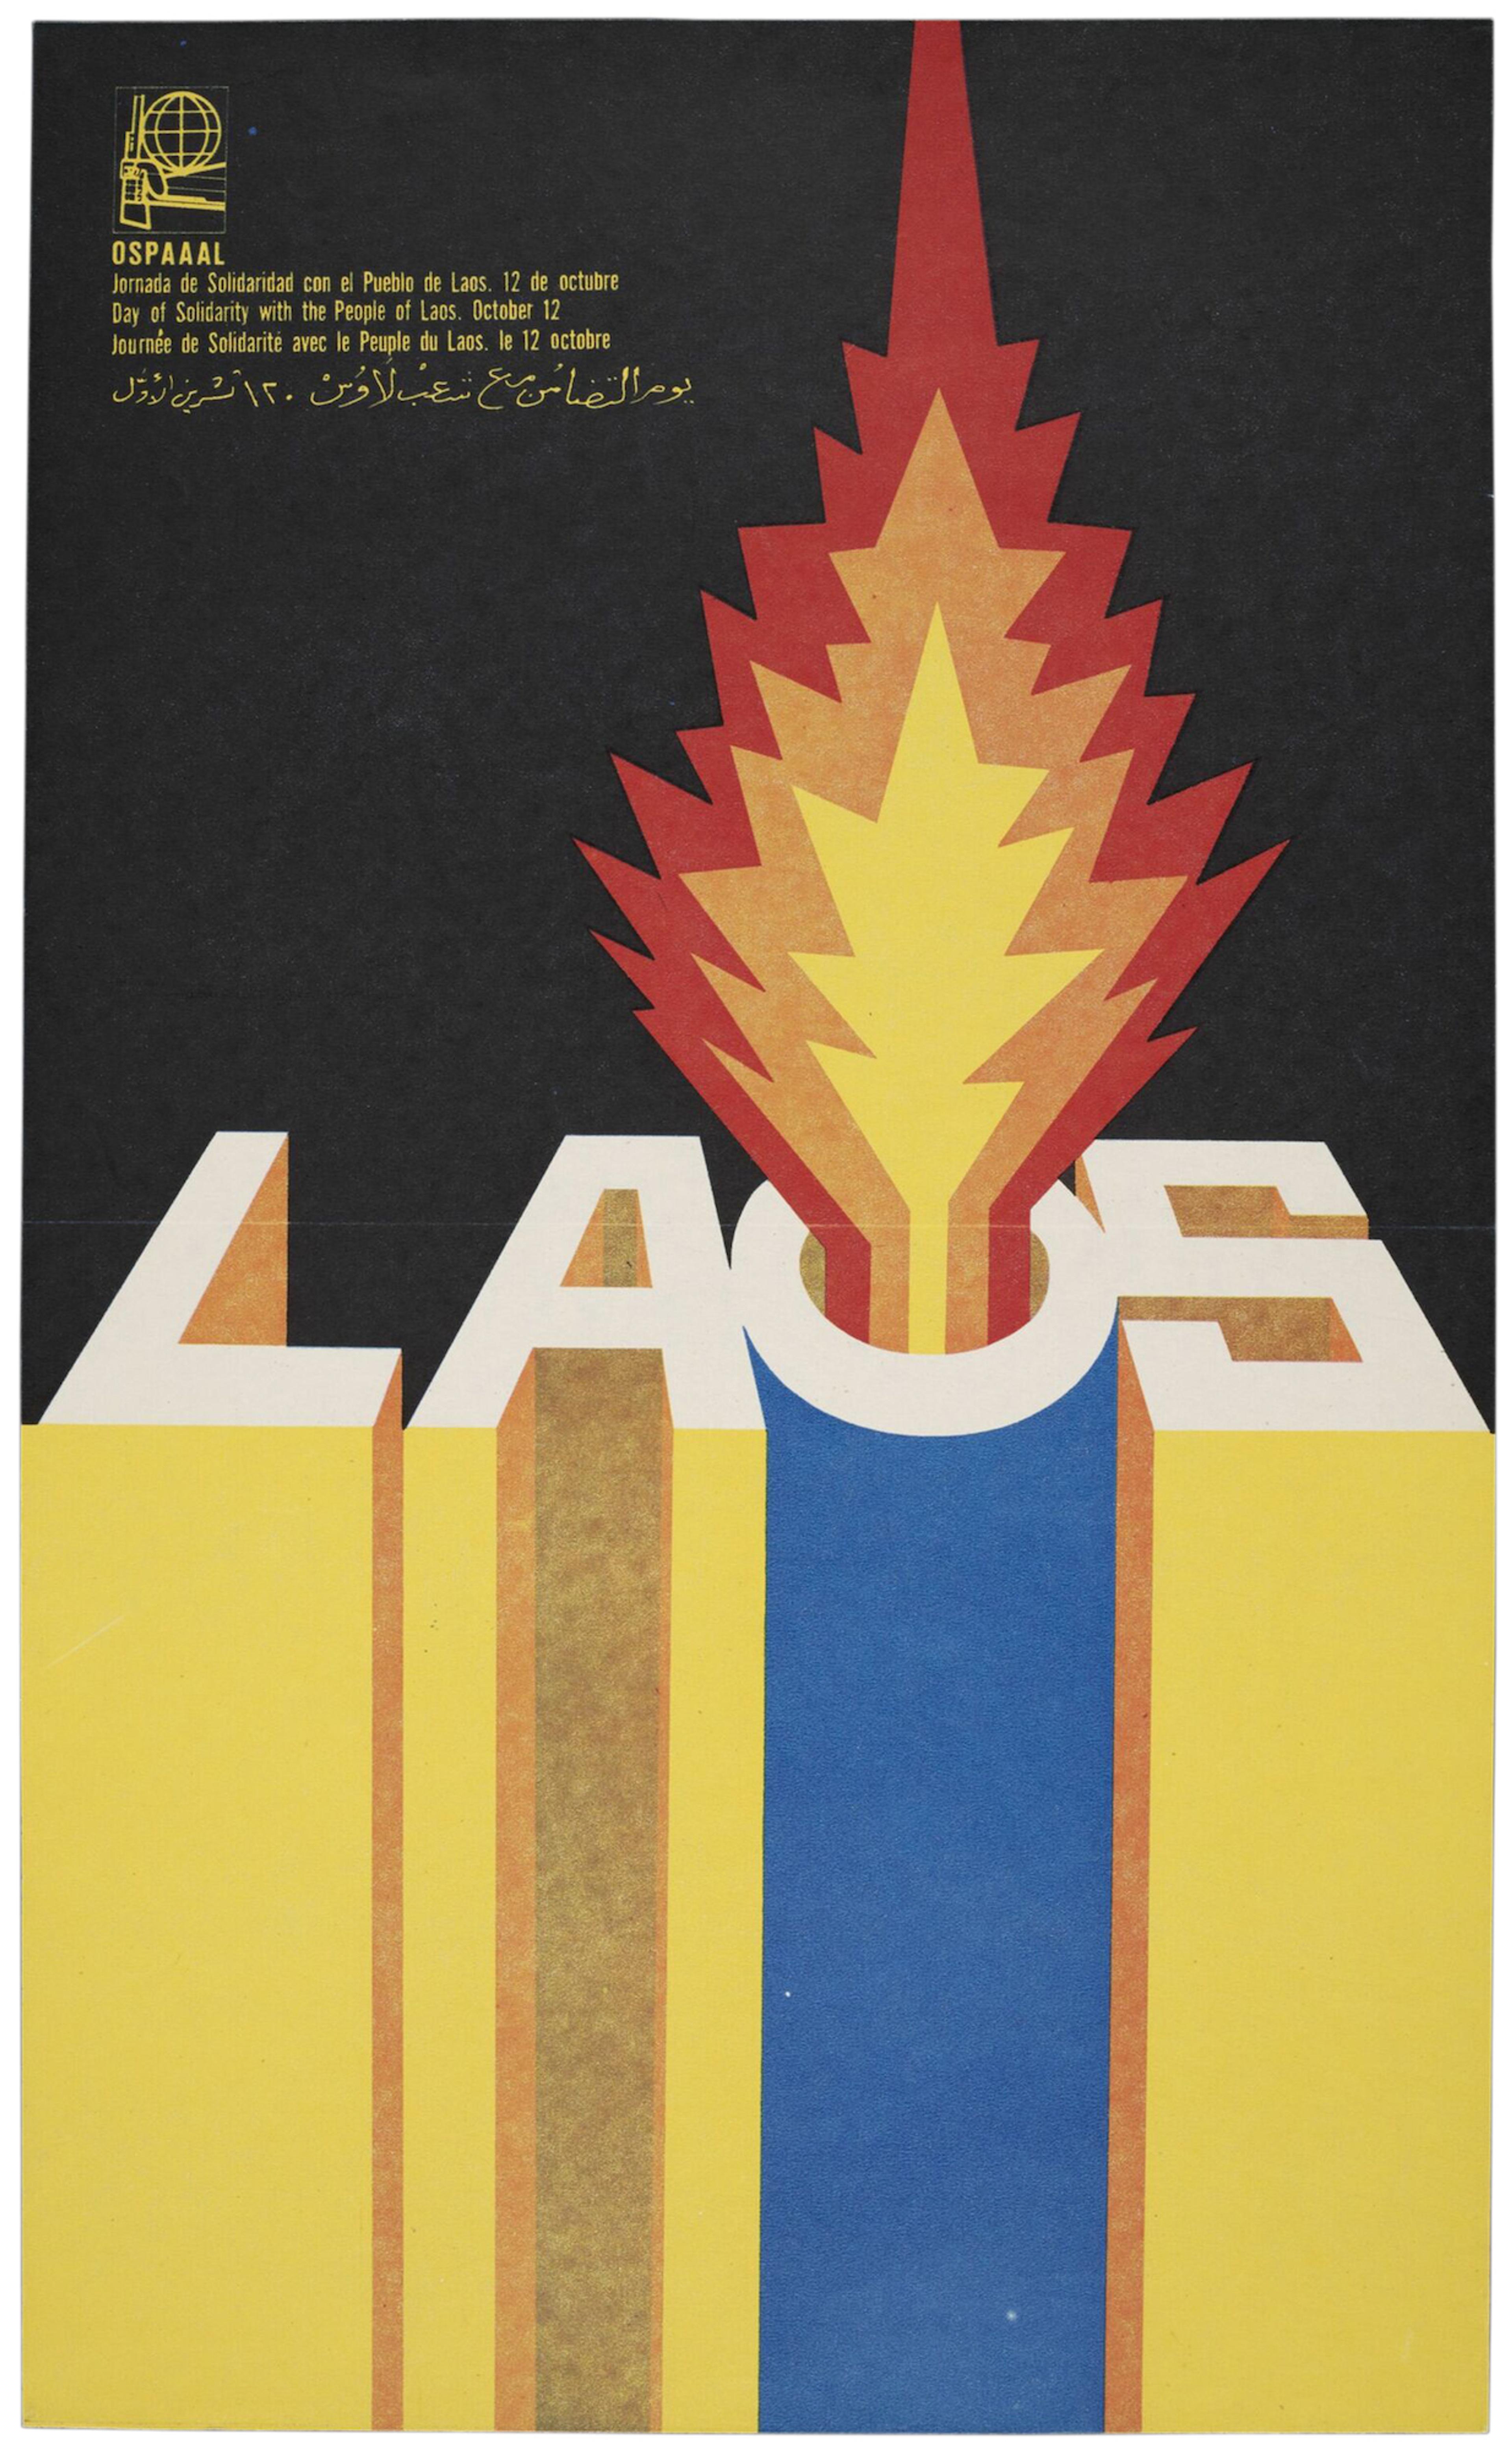 Offset lithograph poster with the word Laos, depicting an explosion bursting forth from the letter O, to advertise a day of solidarity with Laos (12th October).